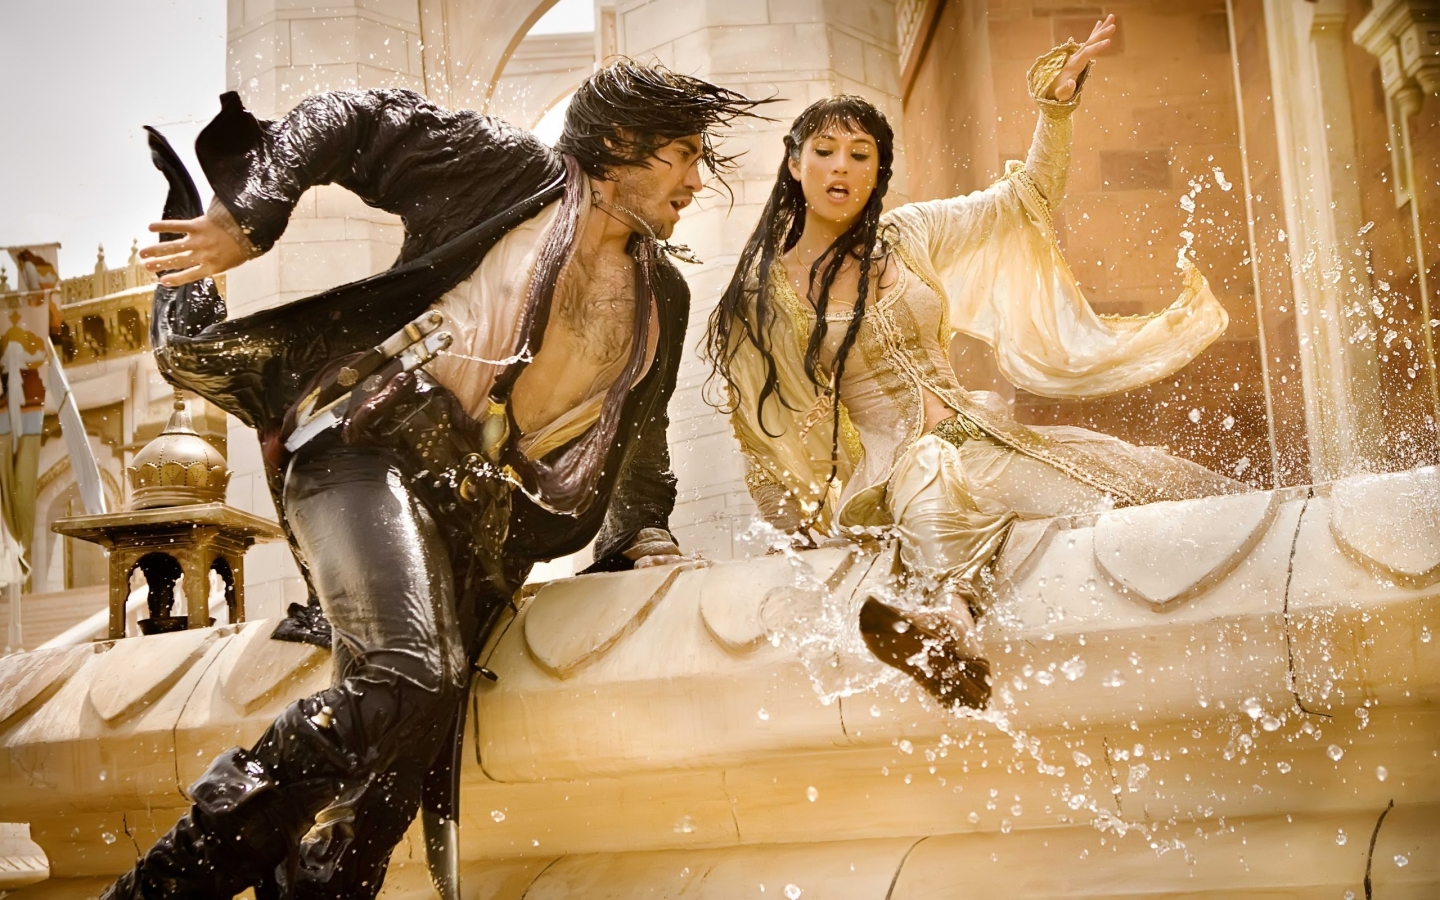 Prince Of Persia: The Sands of Time Movie for 1440 x 900 widescreen resolution